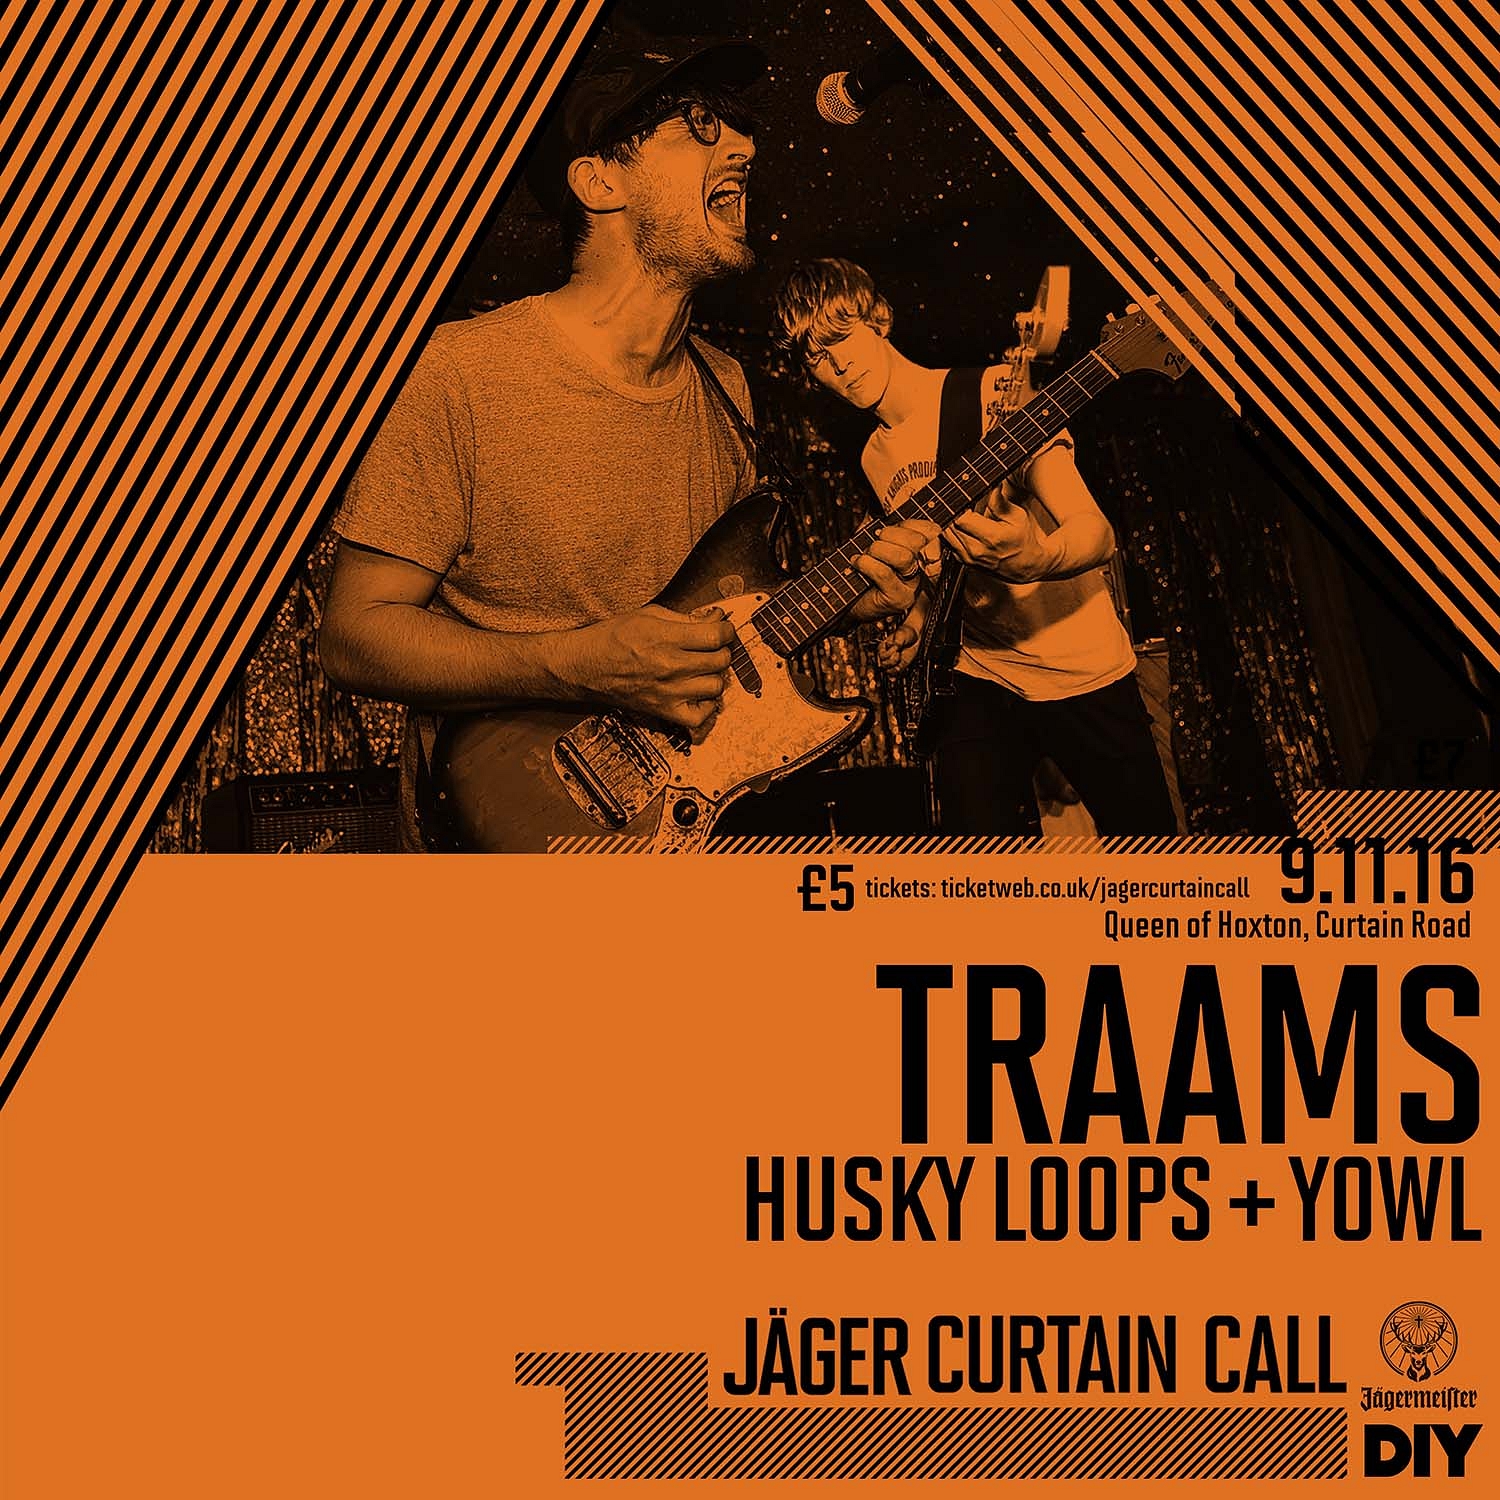 YOWL and Husky Loops join the bill for Traams’ Jäger Curtain Call show